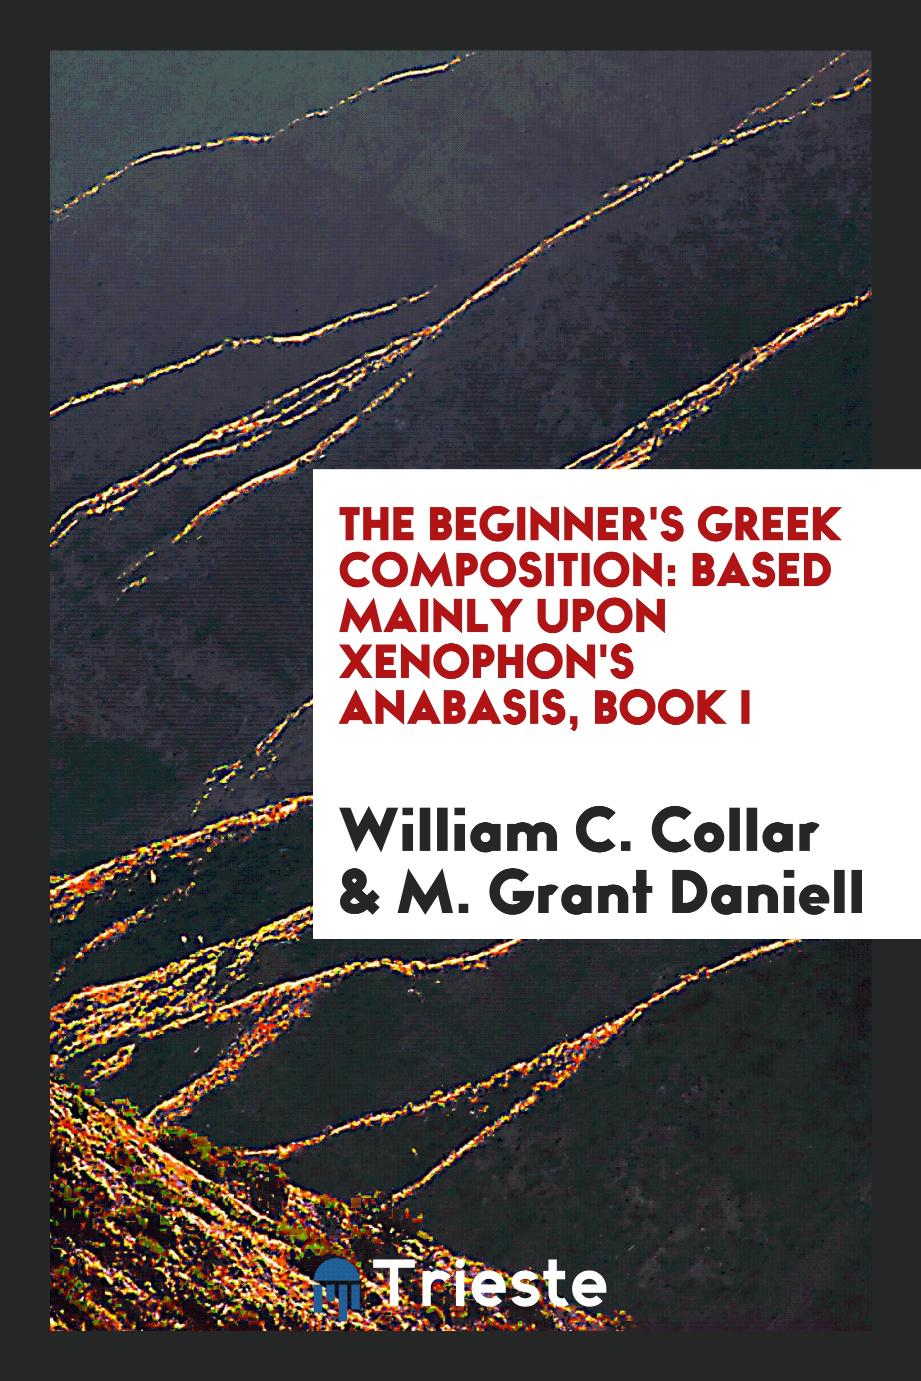 The Beginner's Greek Composition: Based Mainly upon Xenophon's Anabasis, Book I